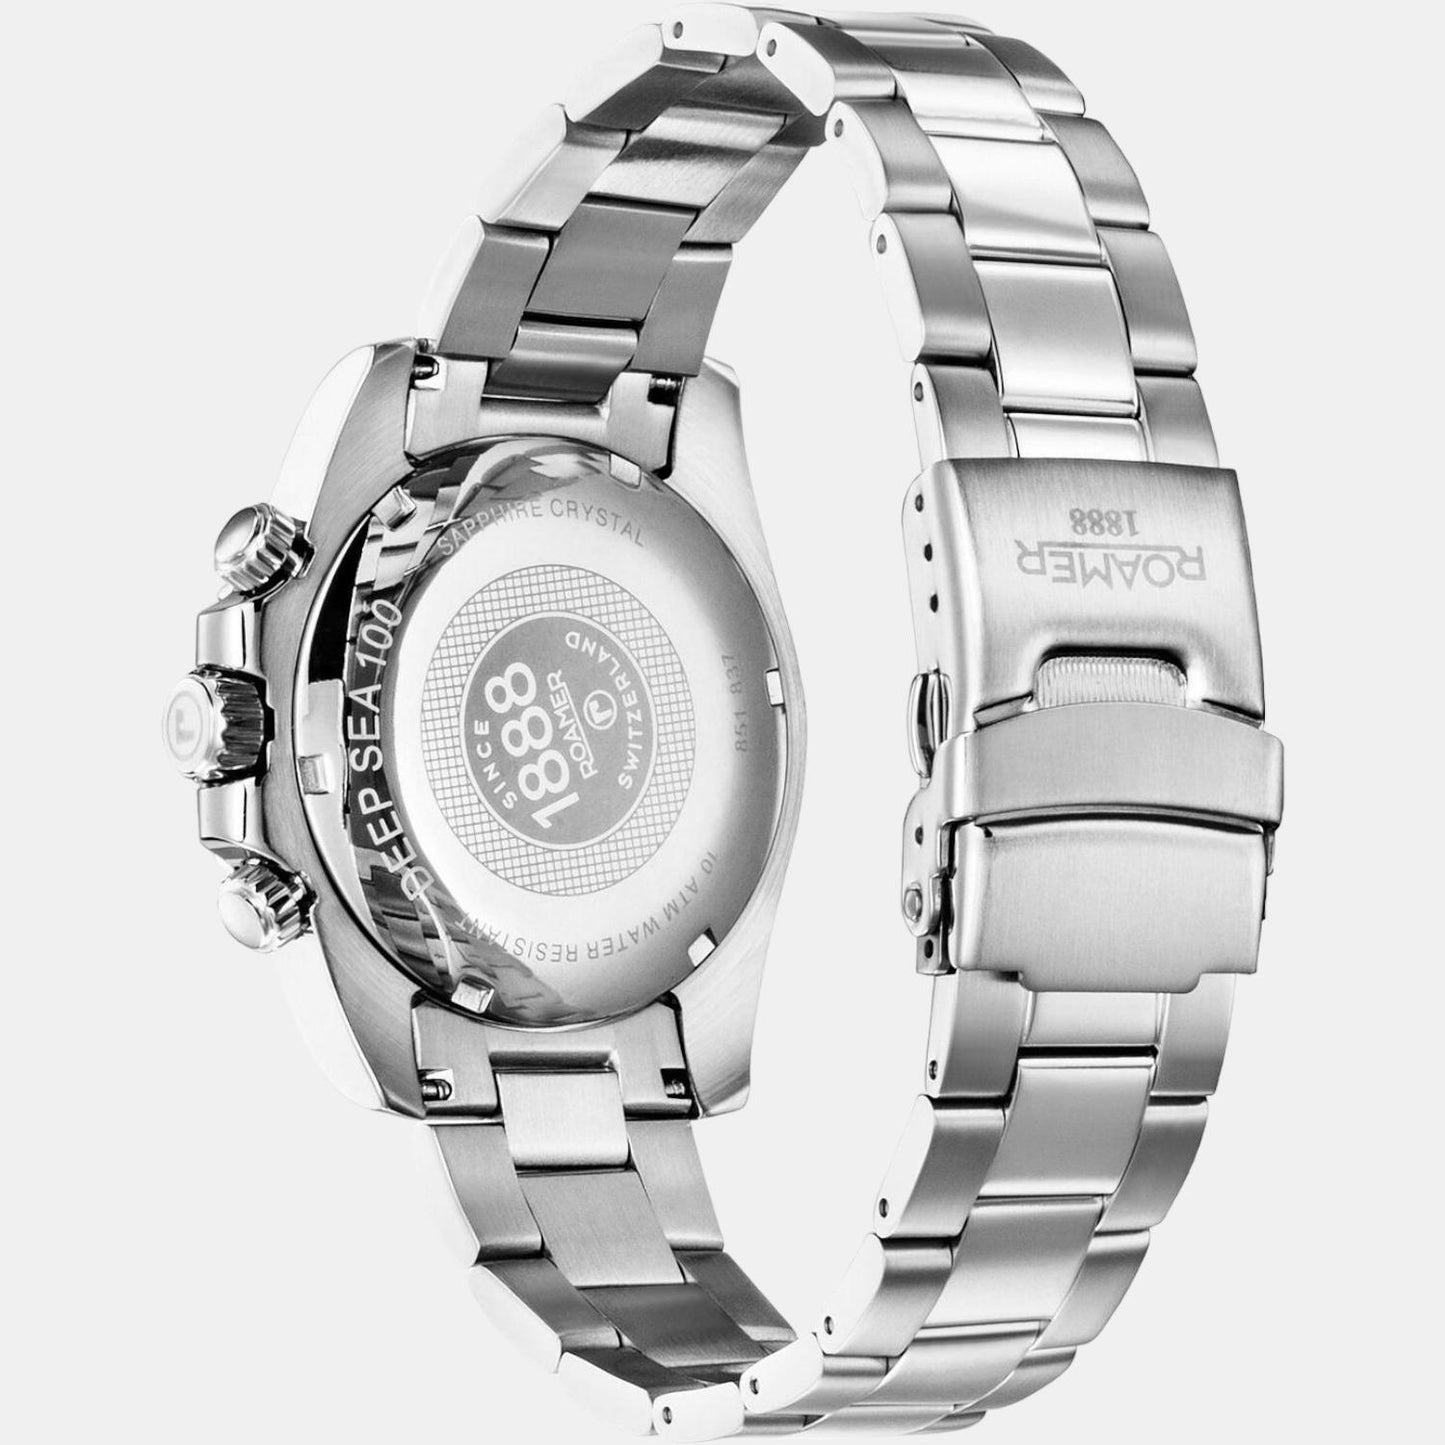 Male Stainless Steel Chronograph Watch 851837 41 75 20